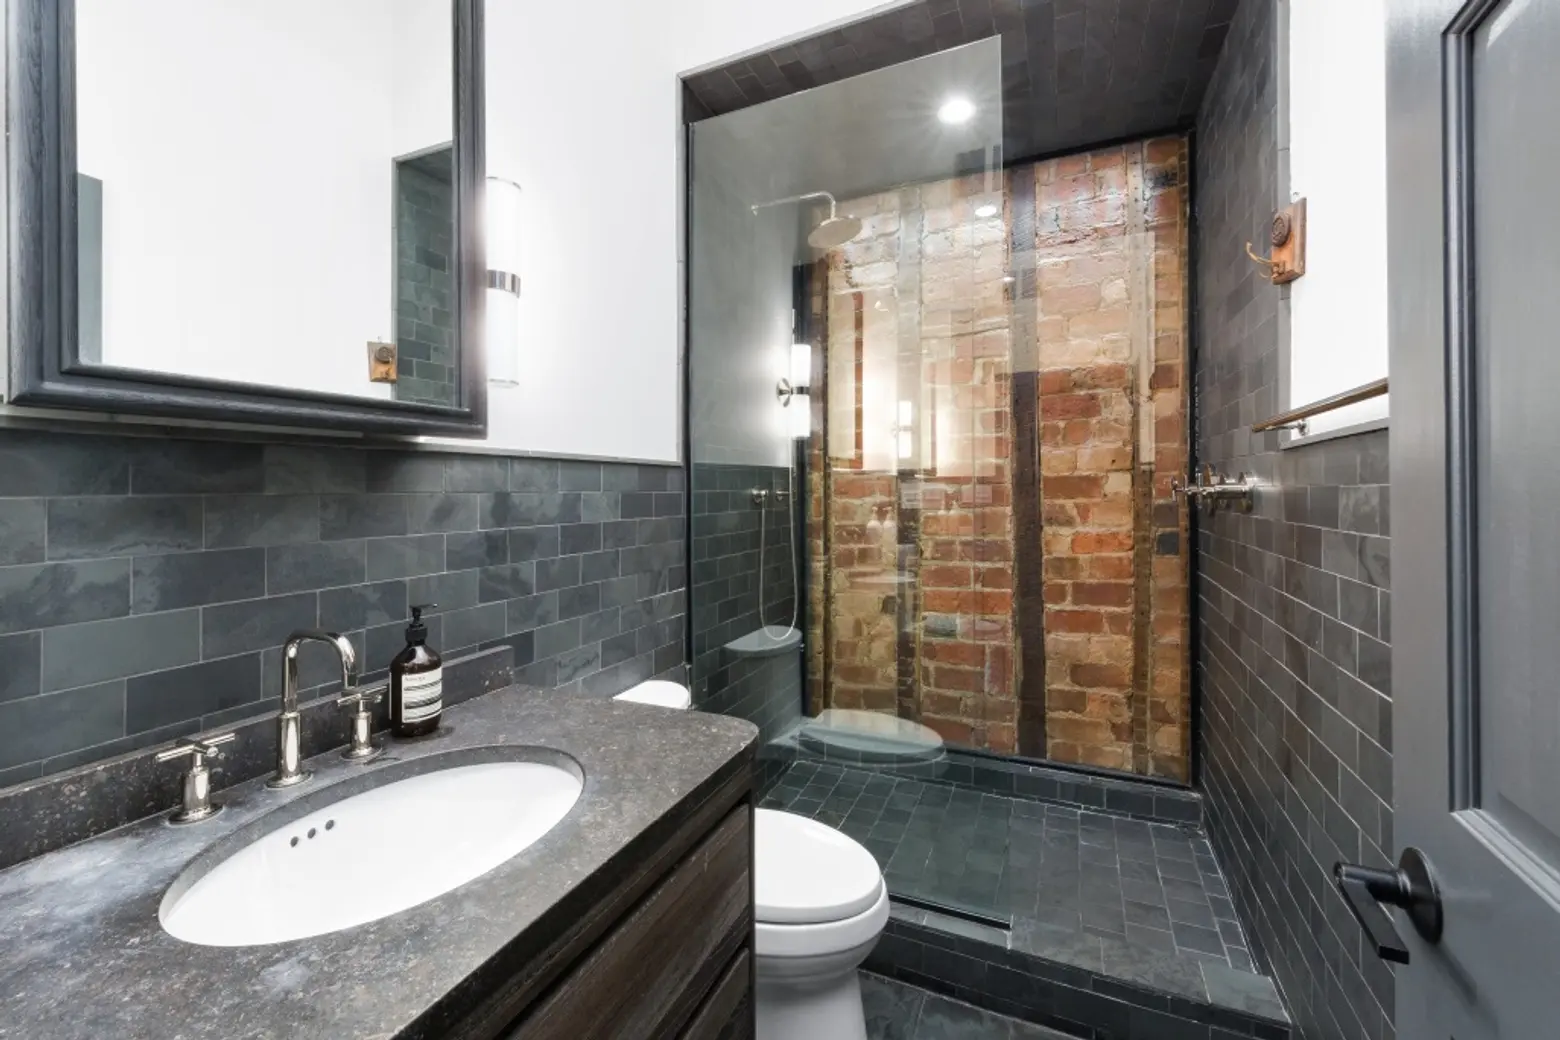 184 Calyer Street, Greenpoint, Cool Listings, townhouses, outdoor space,